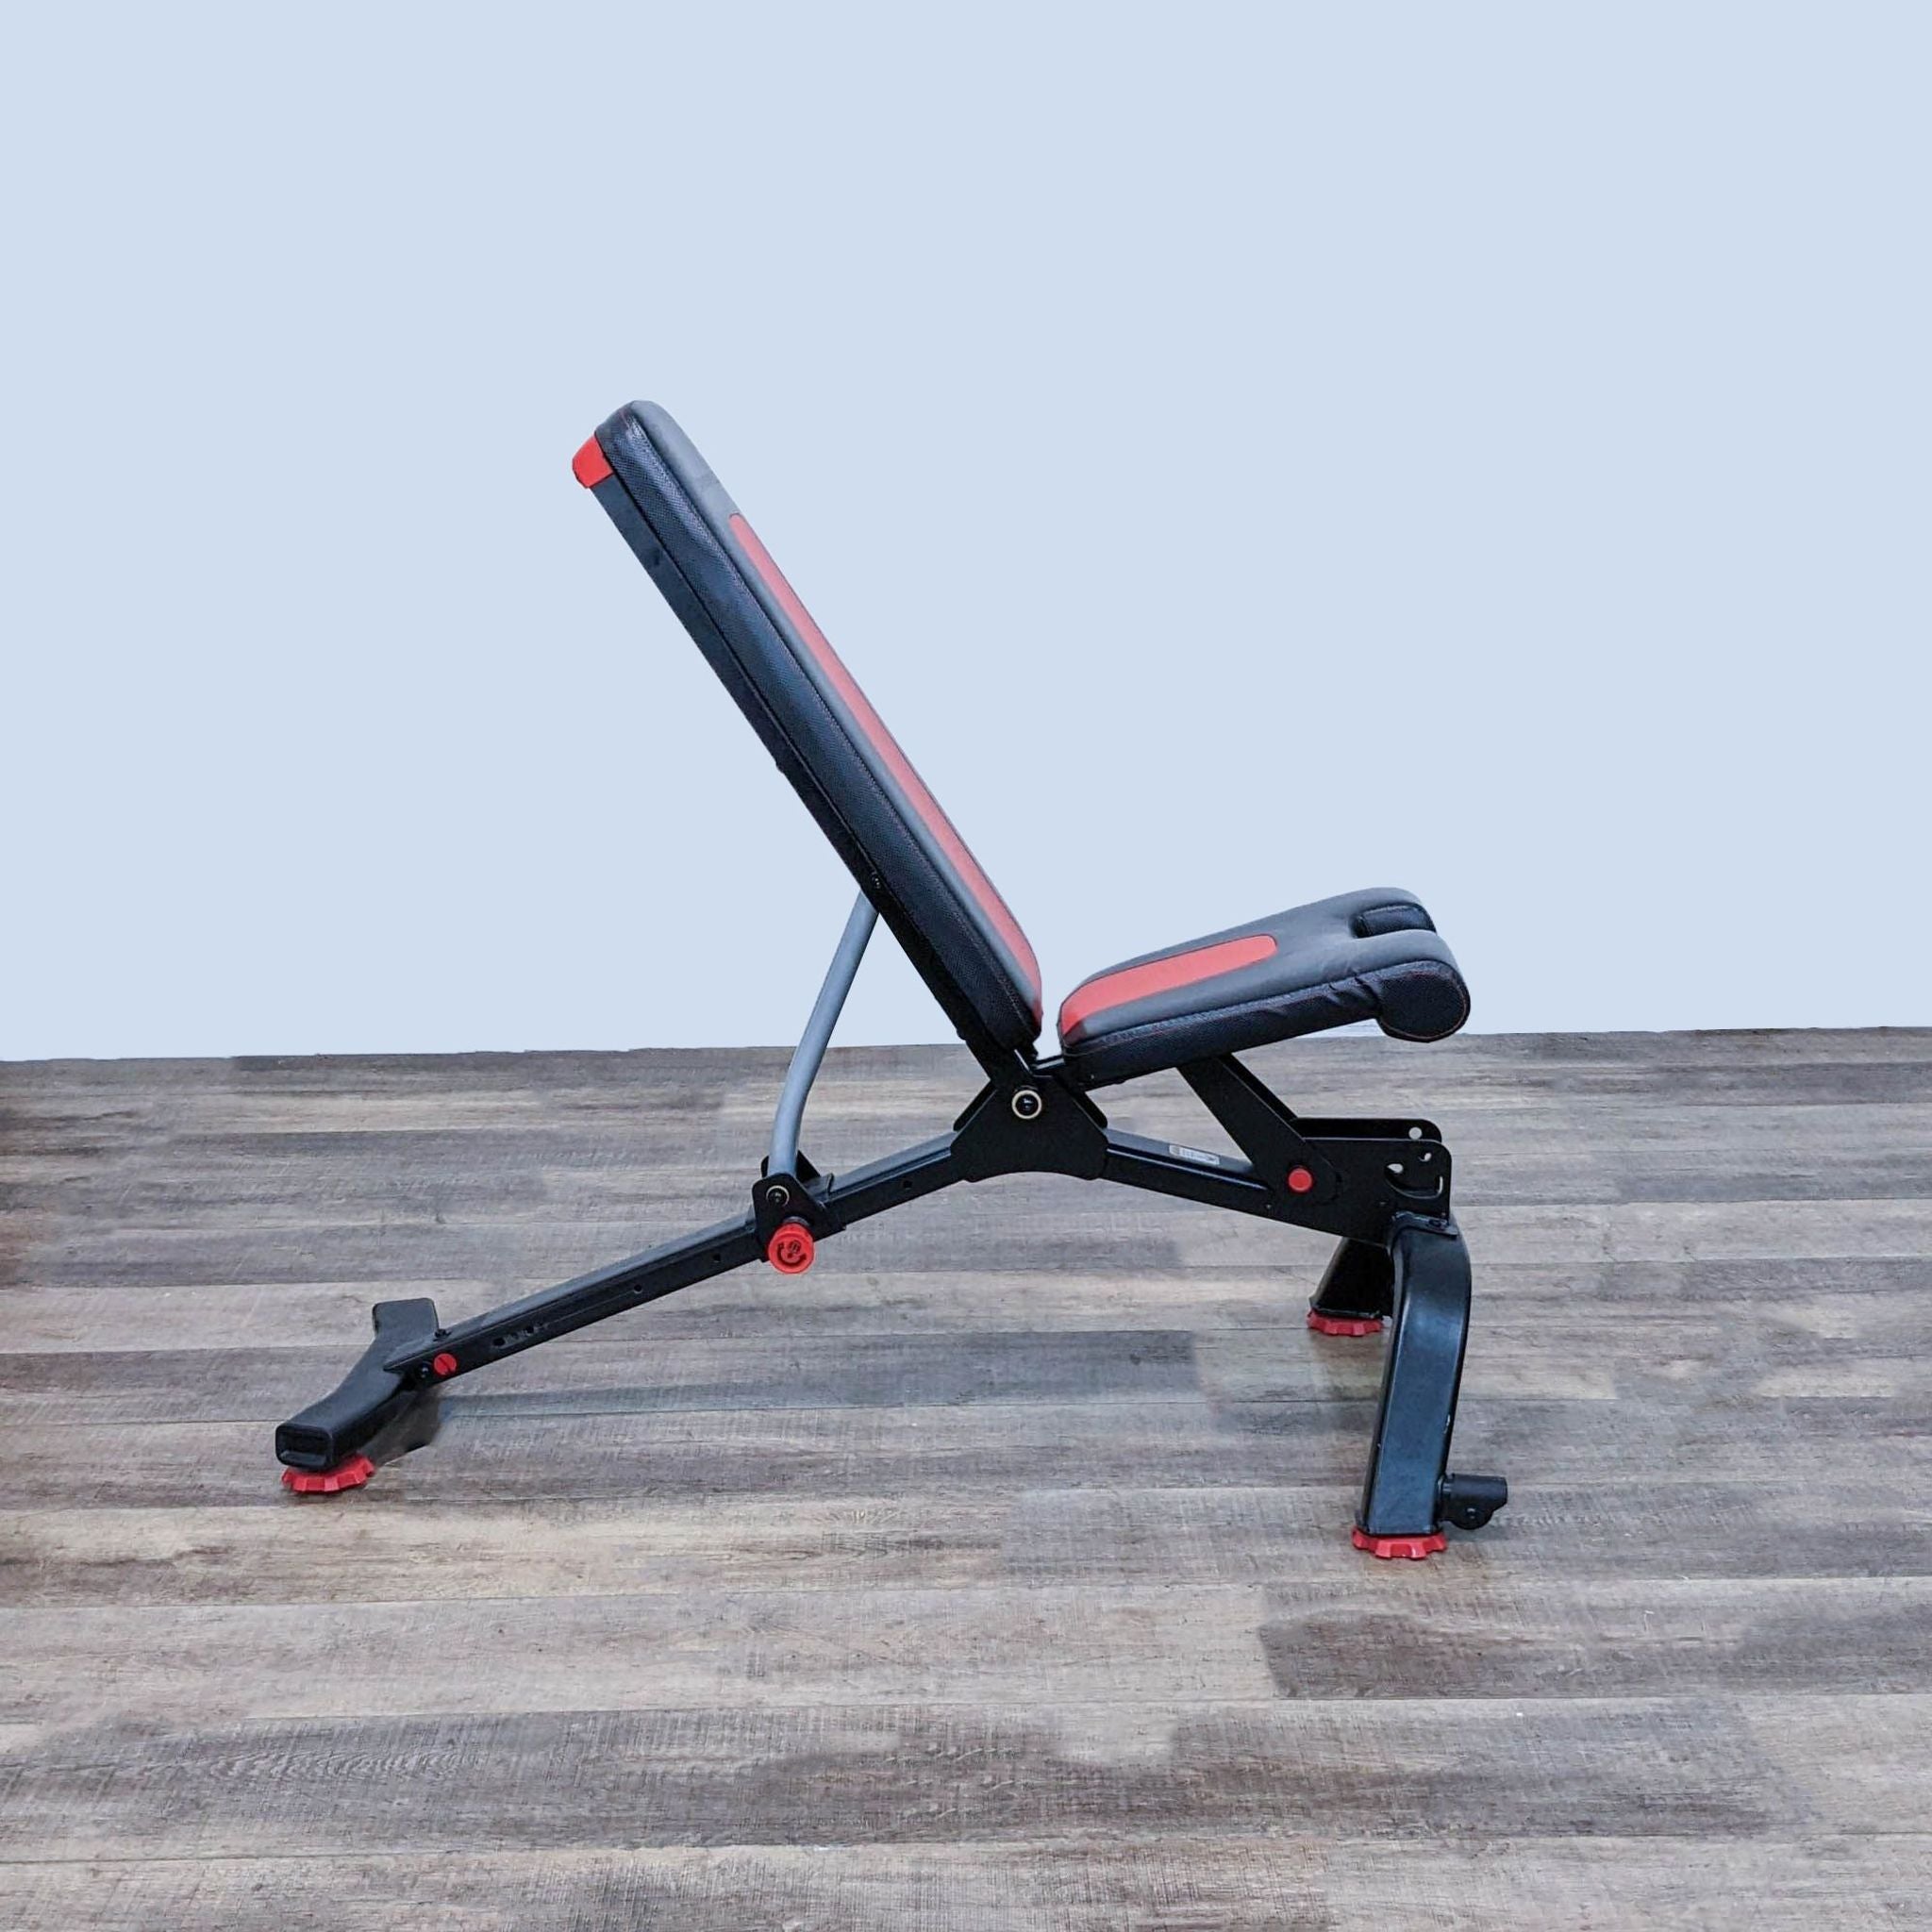 Bowflex adjustable workout bench positioned on a wooden floor with a grey wall background.